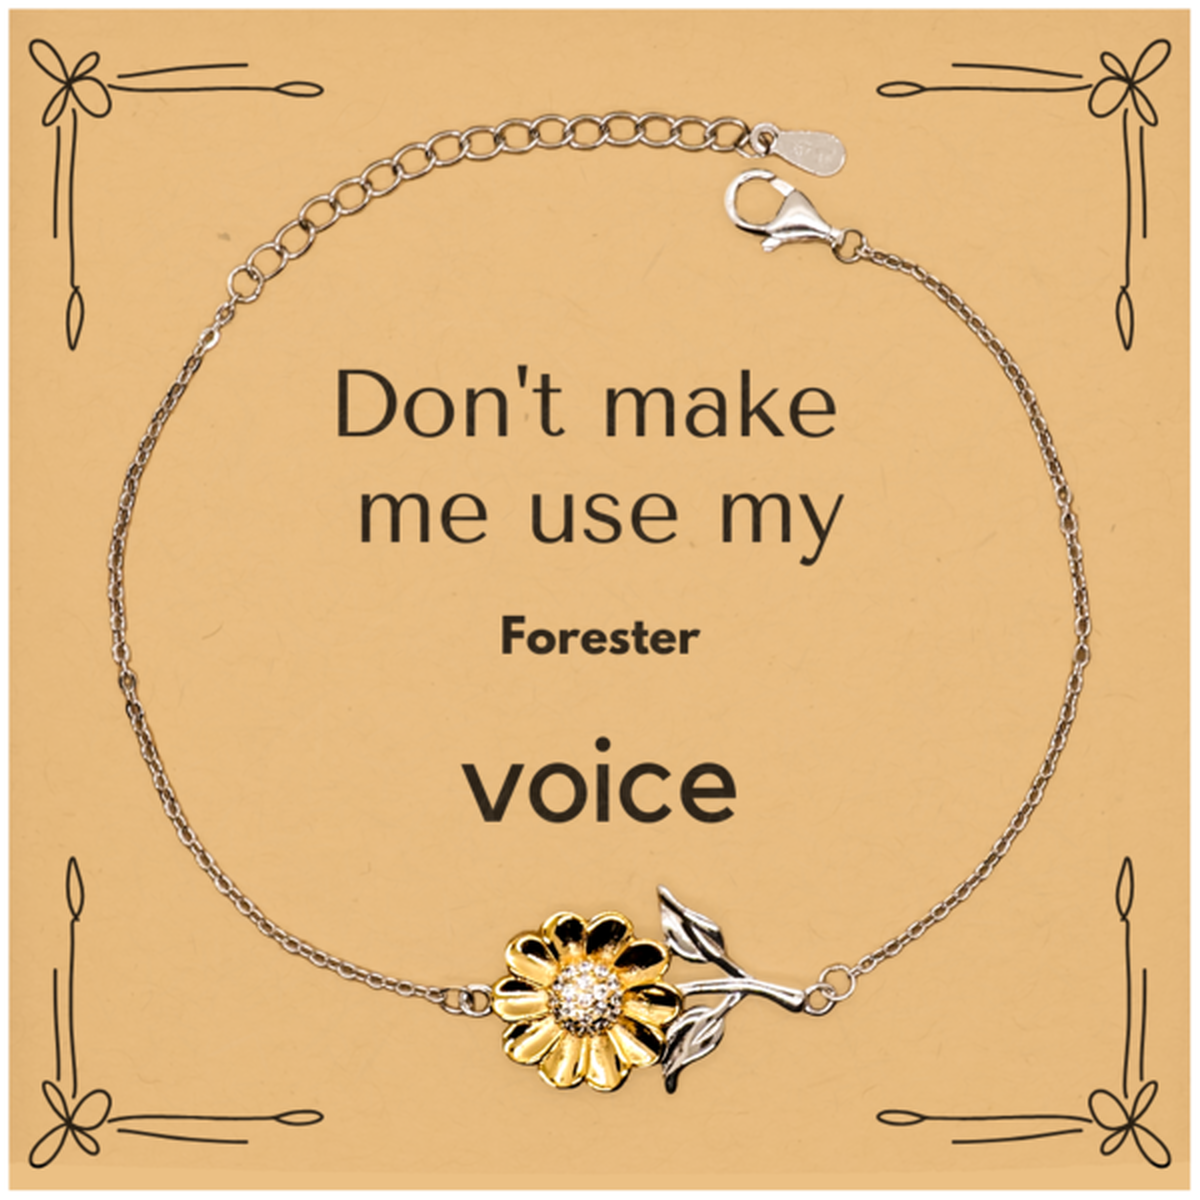 Don't make me use my Forester voice, Sarcasm Forester Card Gifts, Christmas Forester Sunflower Bracelet Birthday Unique Gifts For Forester Coworkers, Men, Women, Colleague, Friends